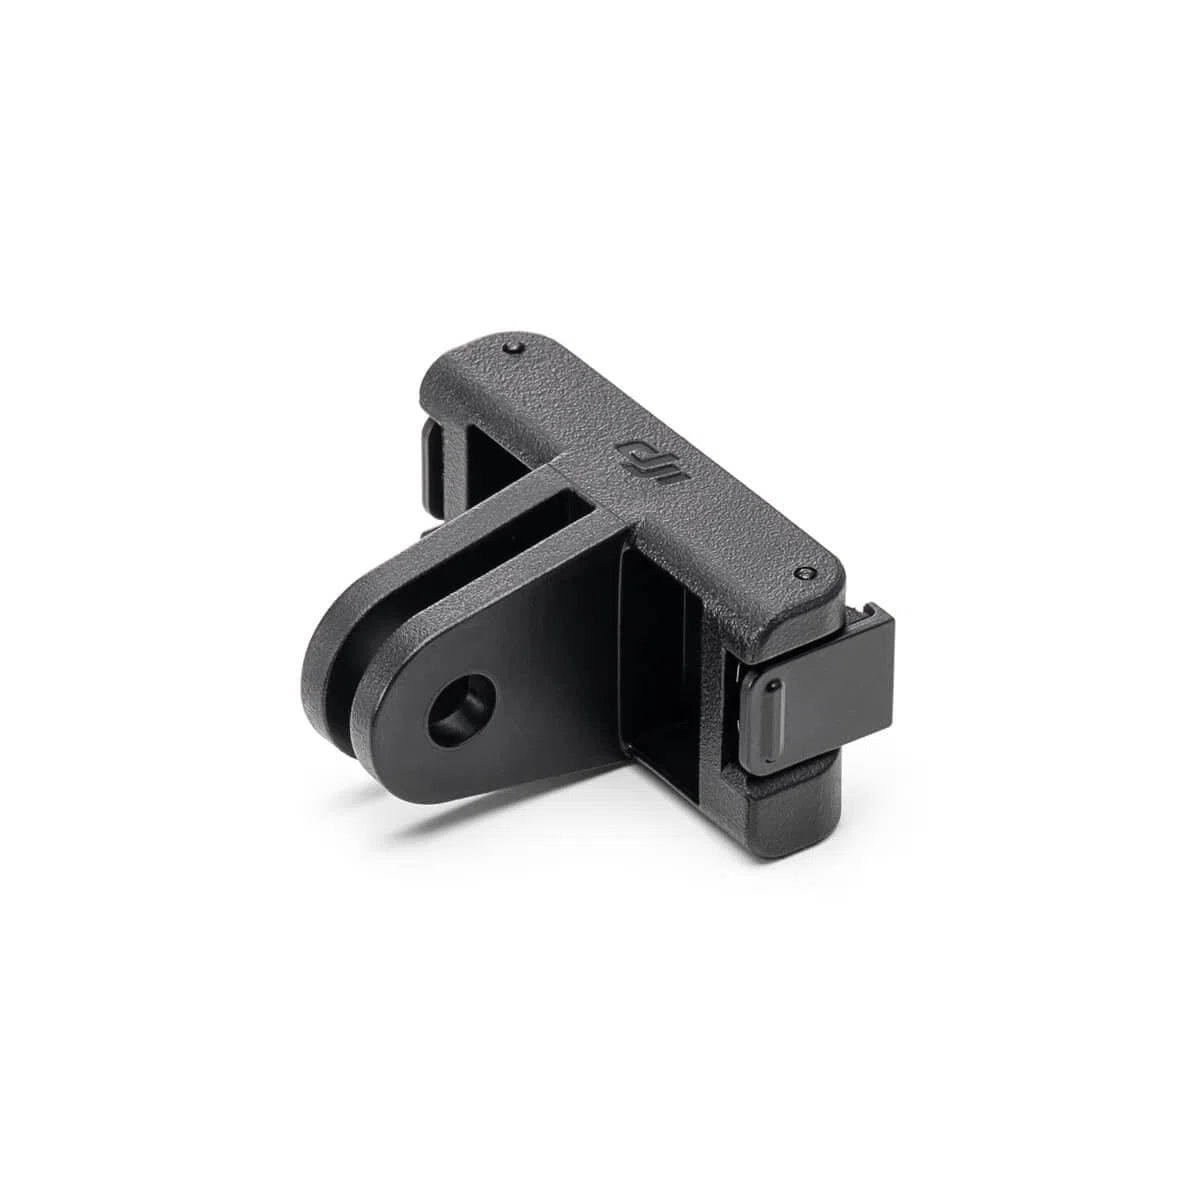 Osmo Action Quick-Release Adapter Mount